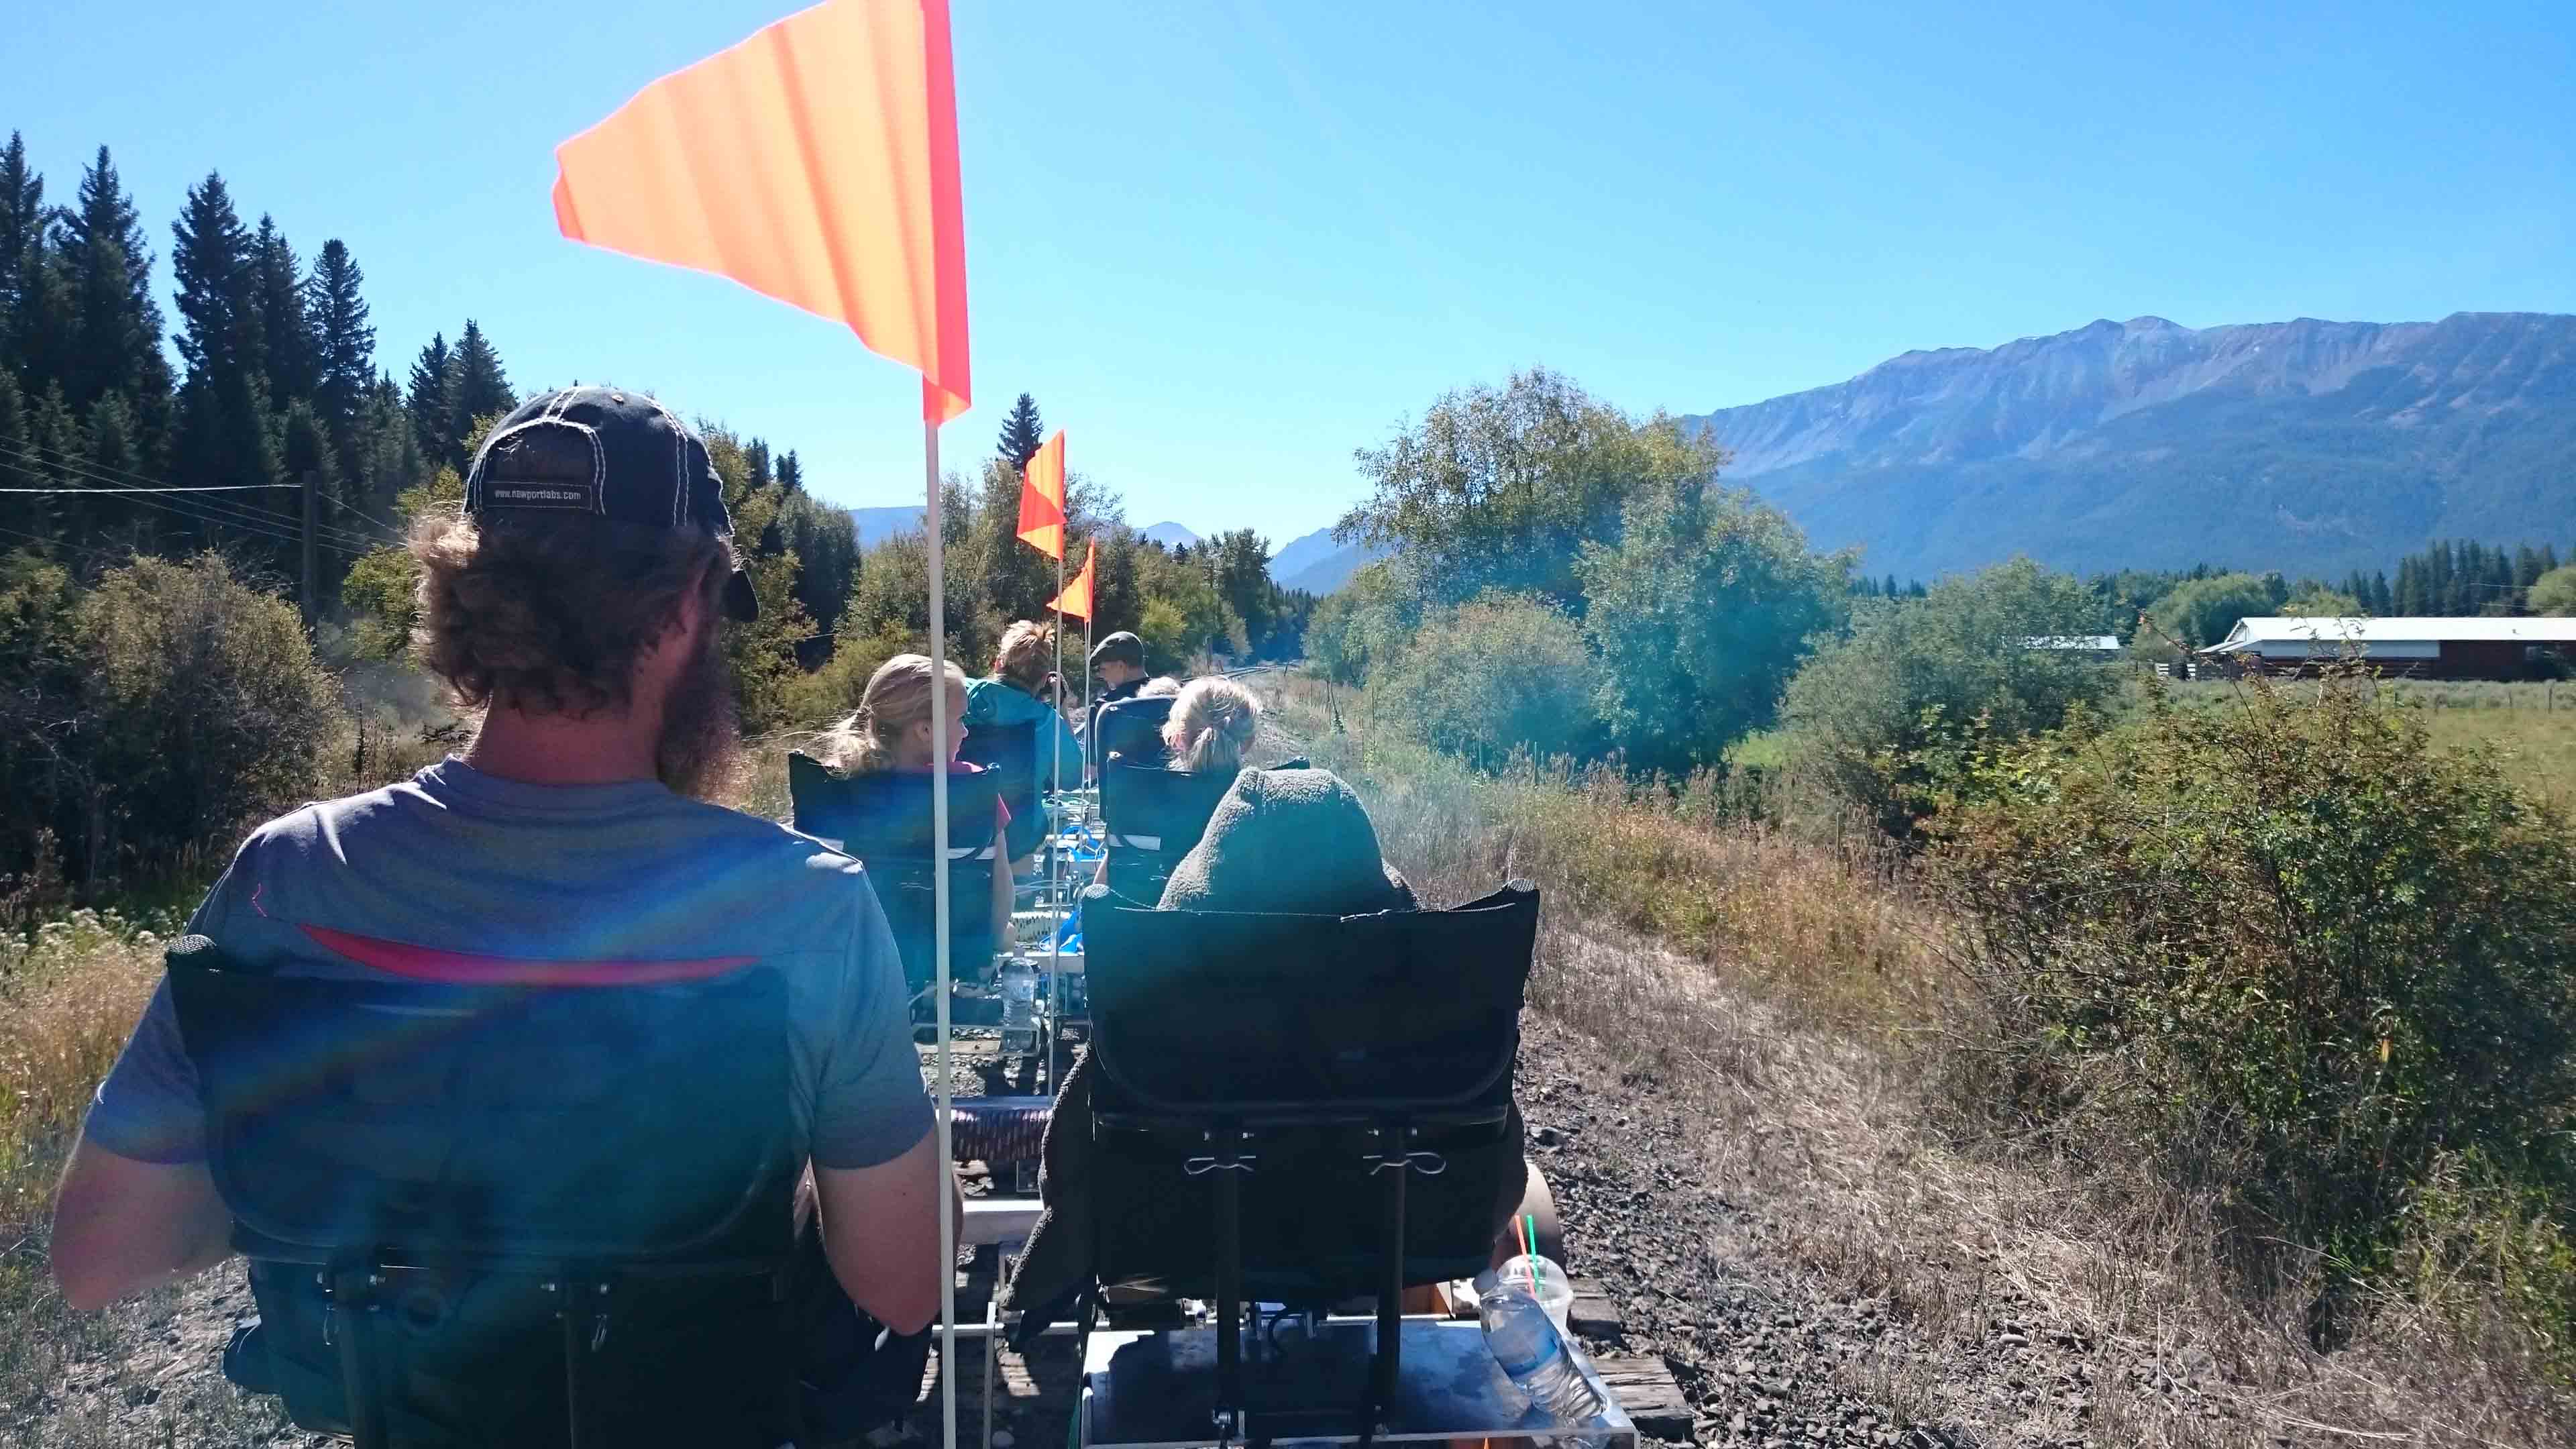 group of people riding on recumbent quadracycles on railroad tracks through scenic landscape